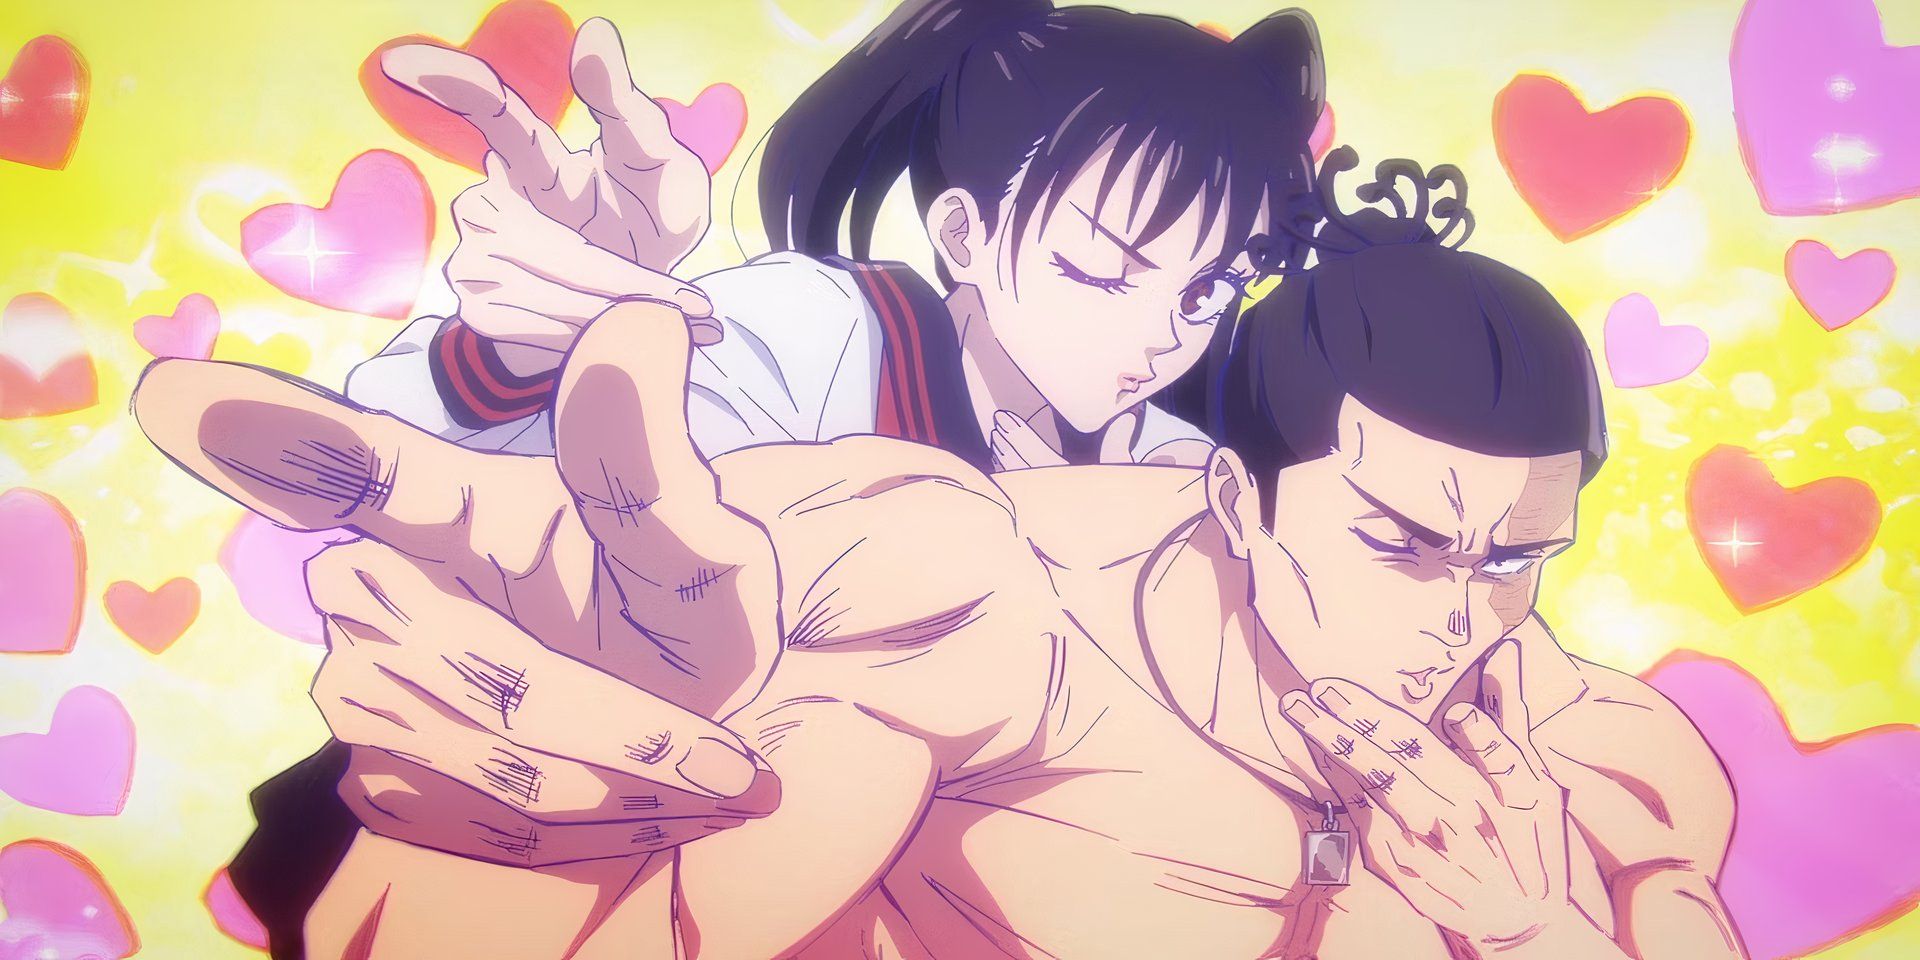 Aoi and Nobuko posing together with hearts around them in Jujutsu Kaisen